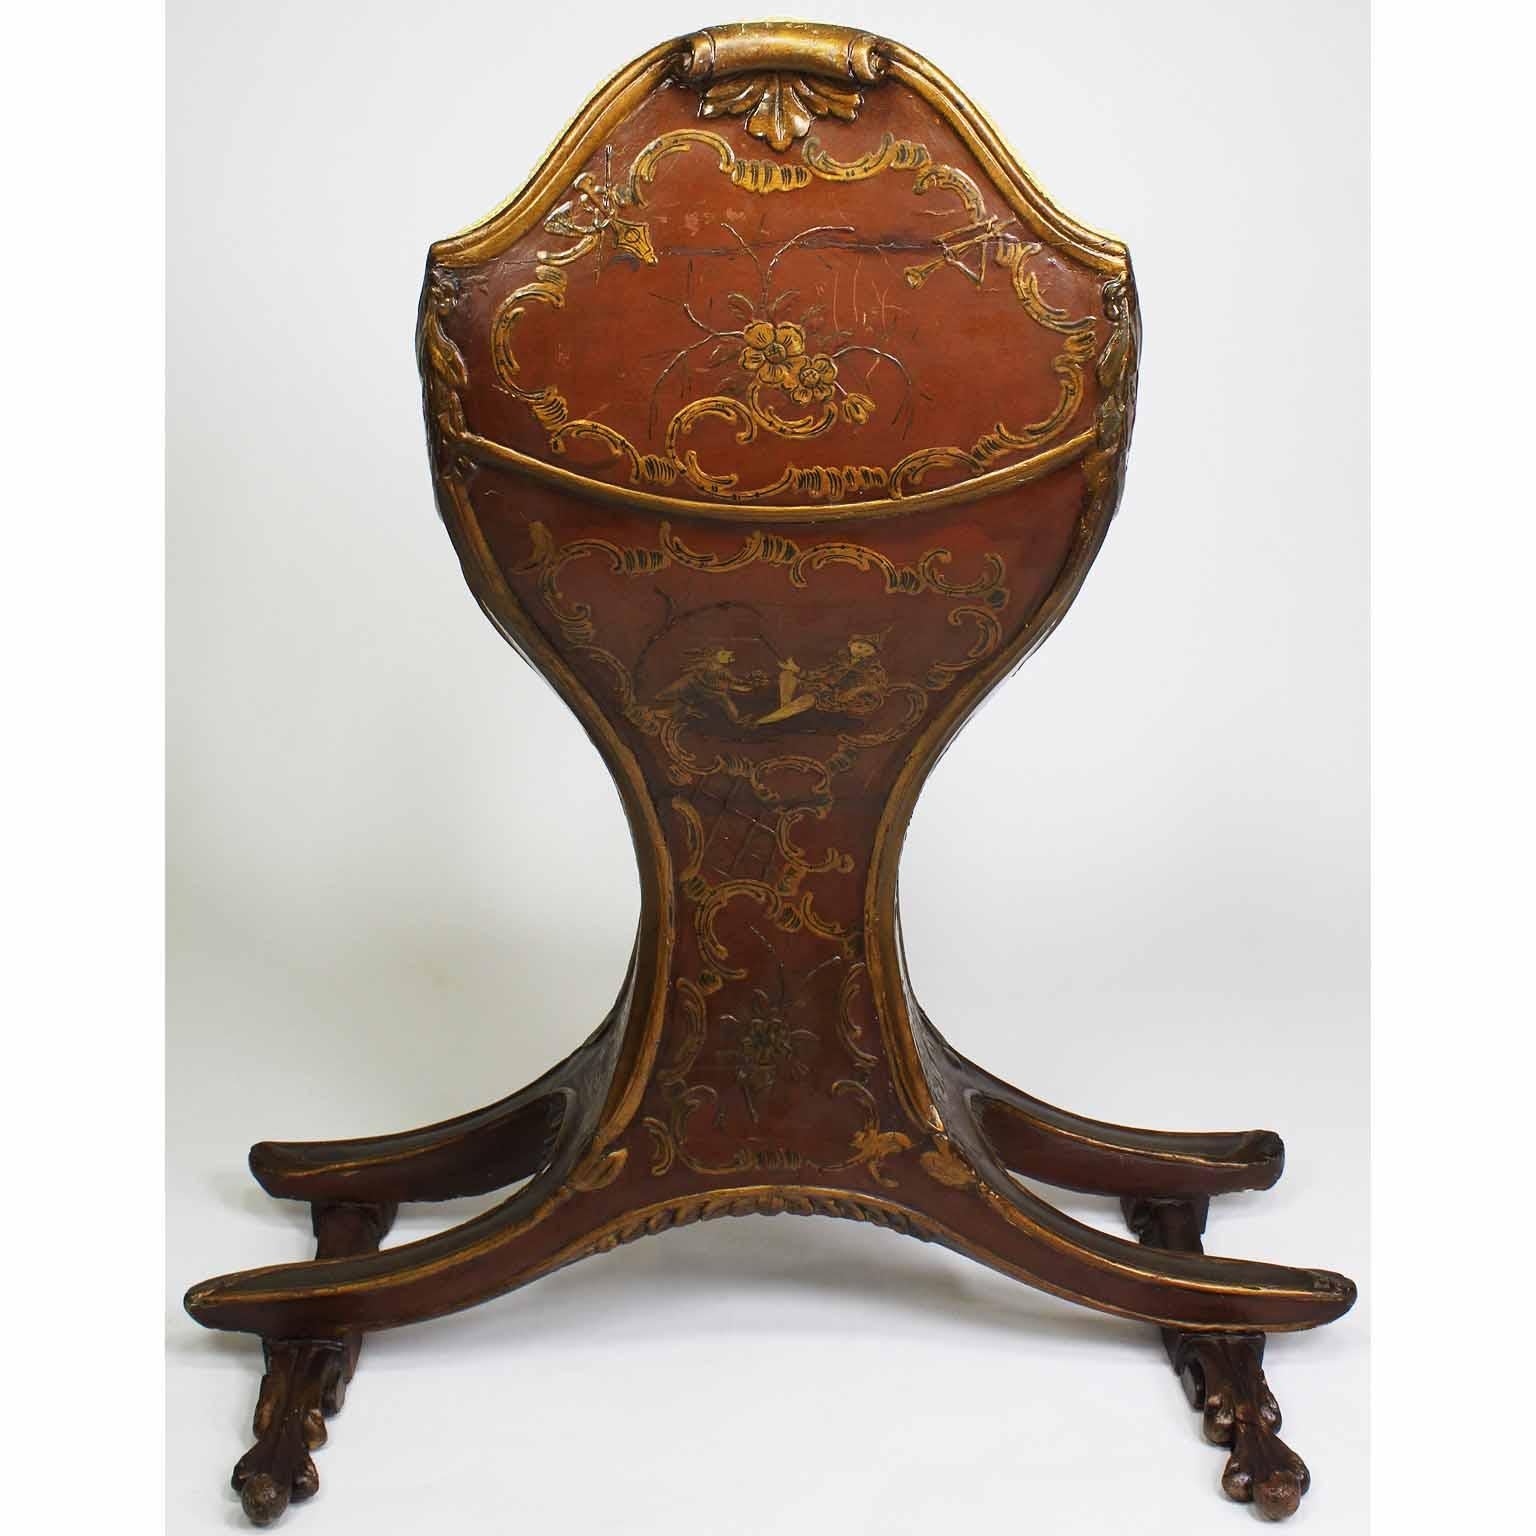 Rare Venetian 18th-19th Century Chinoiserie Red-Lacquer and Gilt Gondola Chair 3